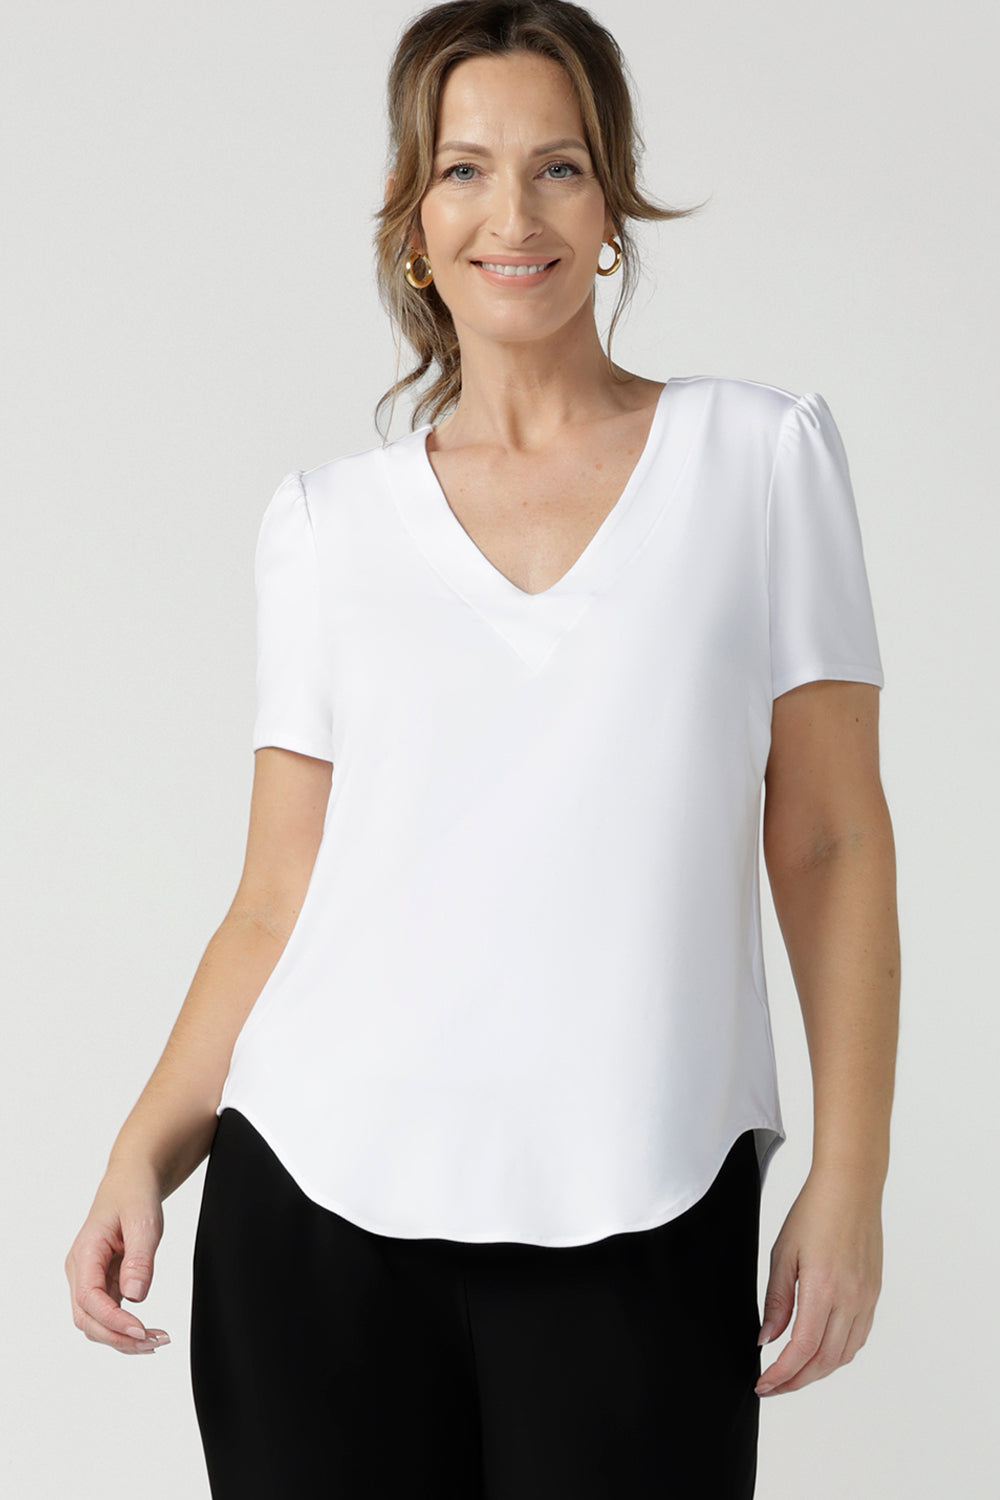 A size 10, 40 plus woman wears a V-neck, short sleeve top in white bamboo jersey. This tailored white top cuts a T-shirt look for casual wear and comfortable workwear. Shop made-in-Australia bamboo jersey tops online in petite, mid size and plus sizes at women's clothing brand, Leina & Fleur.